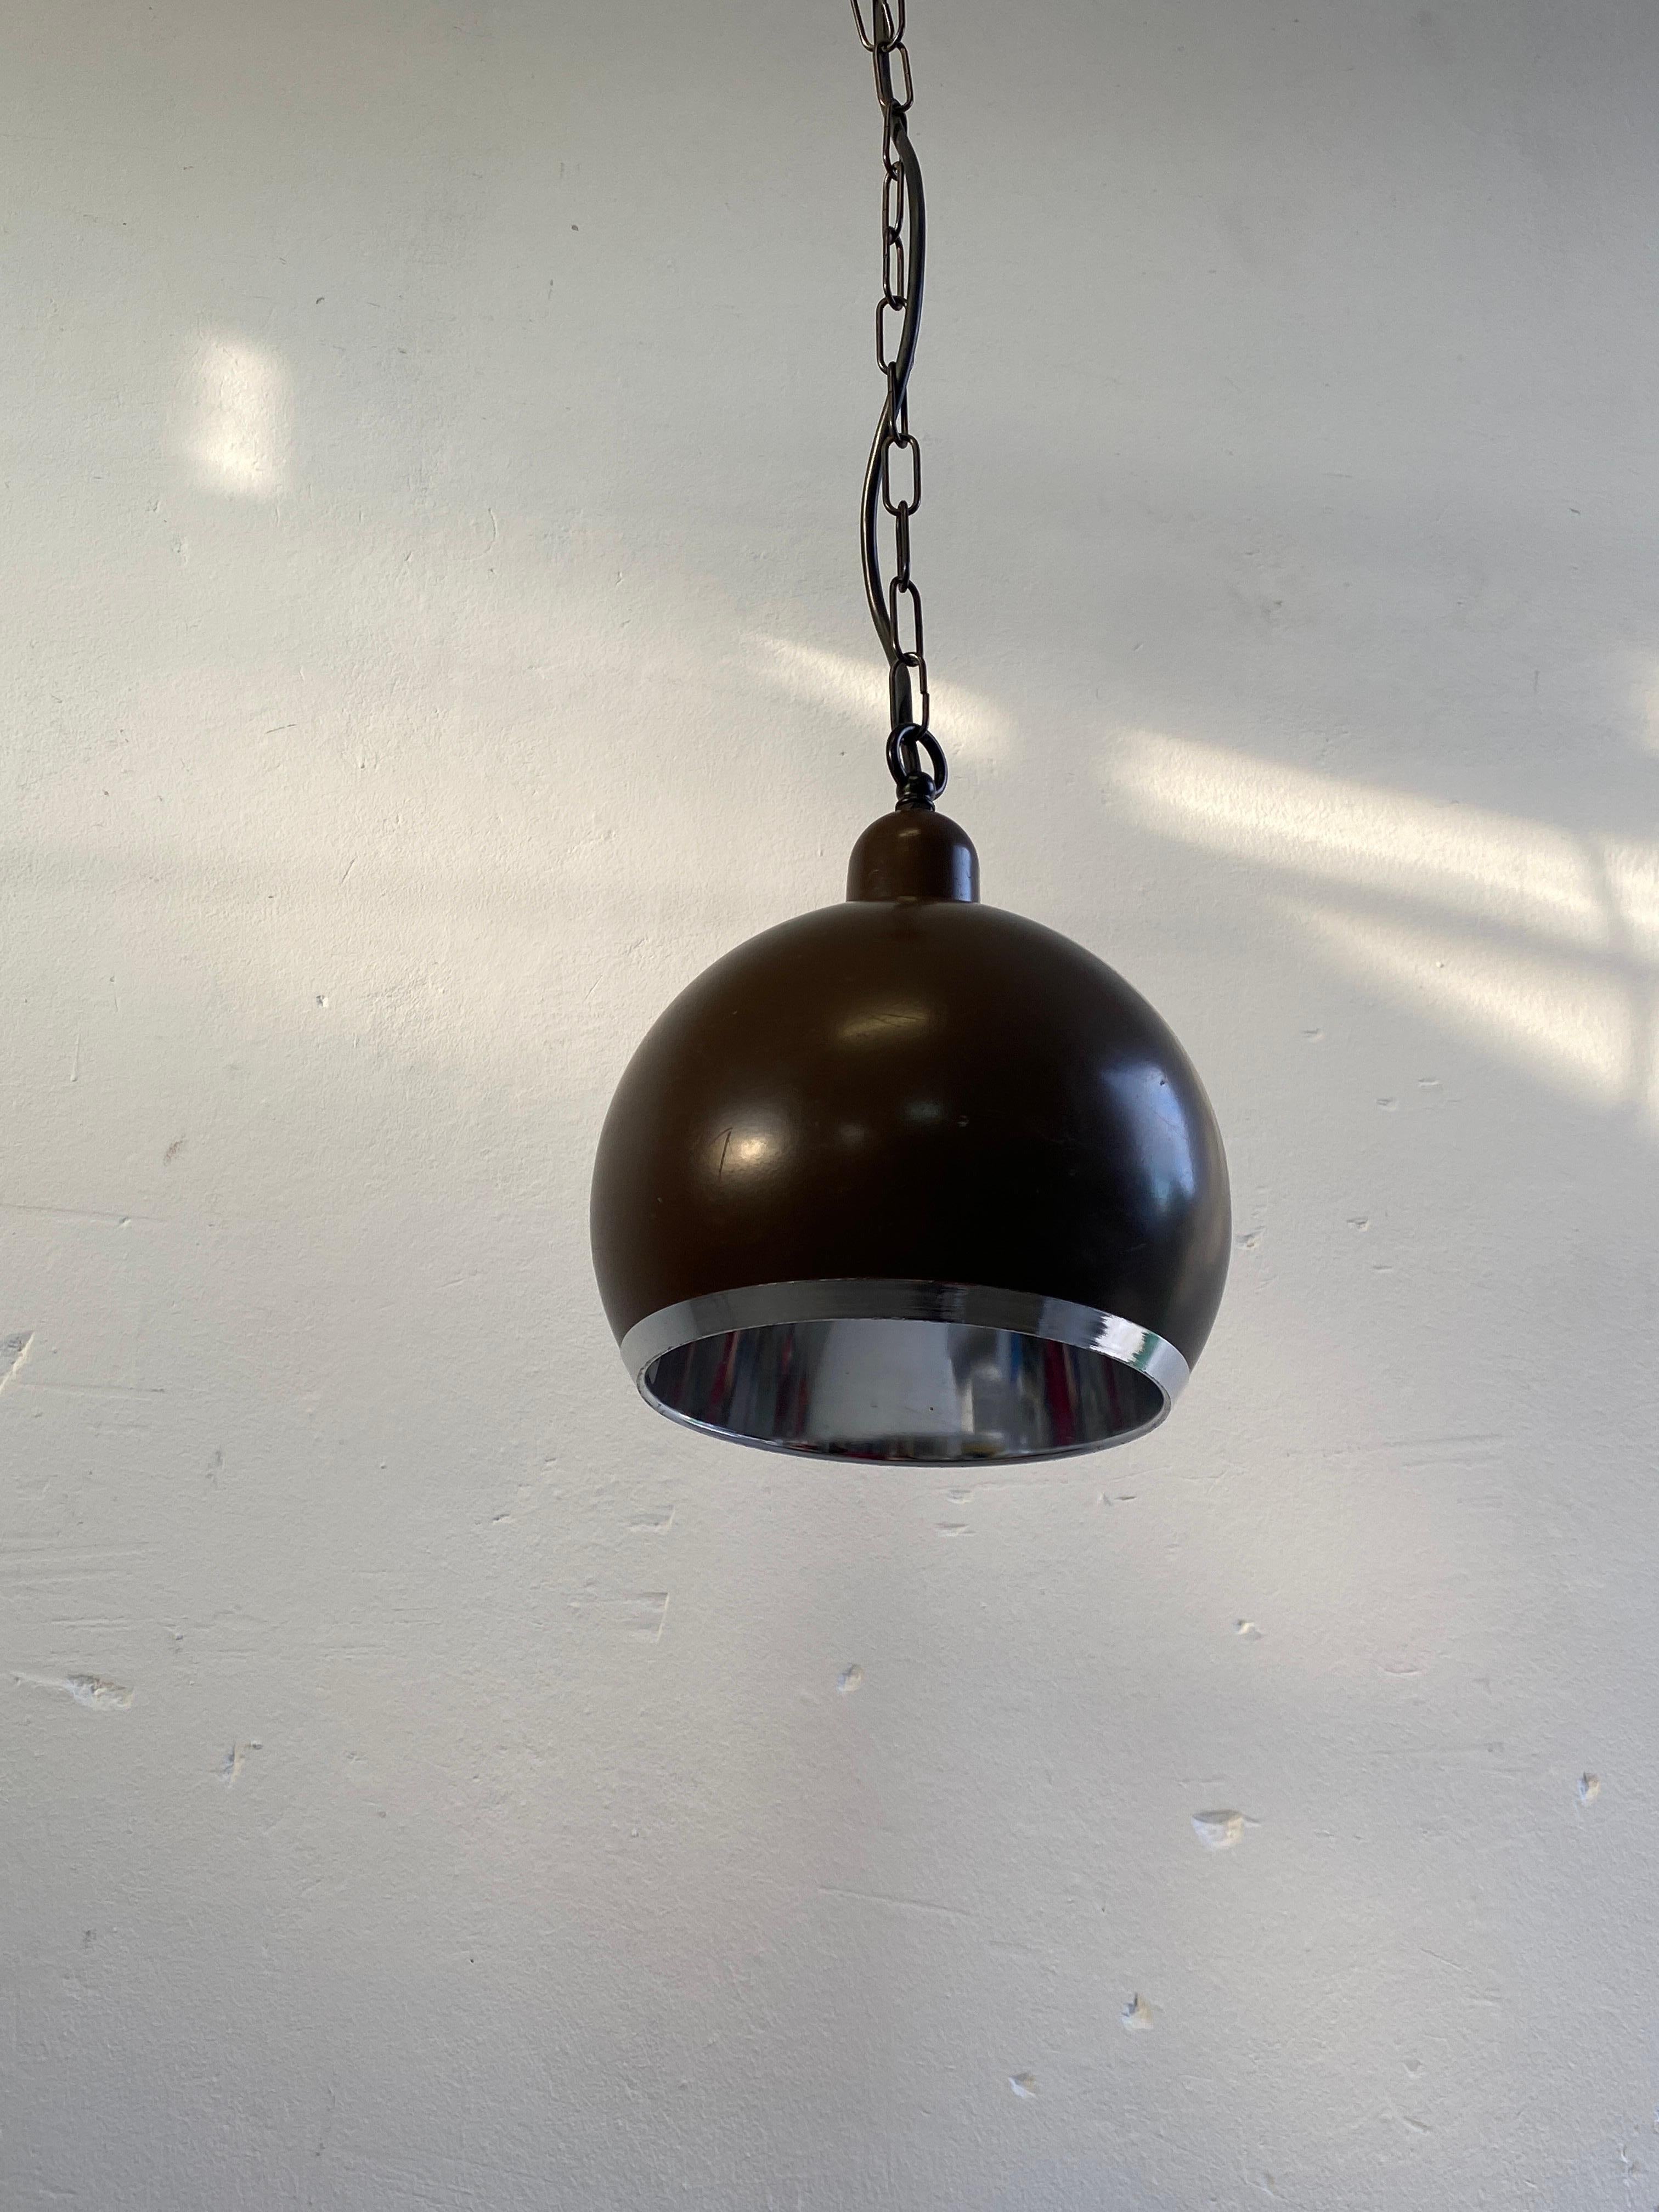 Vintage Spaceage pendant, brown and chrome light. 

In good vintage condition with some expected surface scratches, as indicated in the photos.

Holds one E27 bulb, up to 40W. (not included)

We try our best to accurately depict any